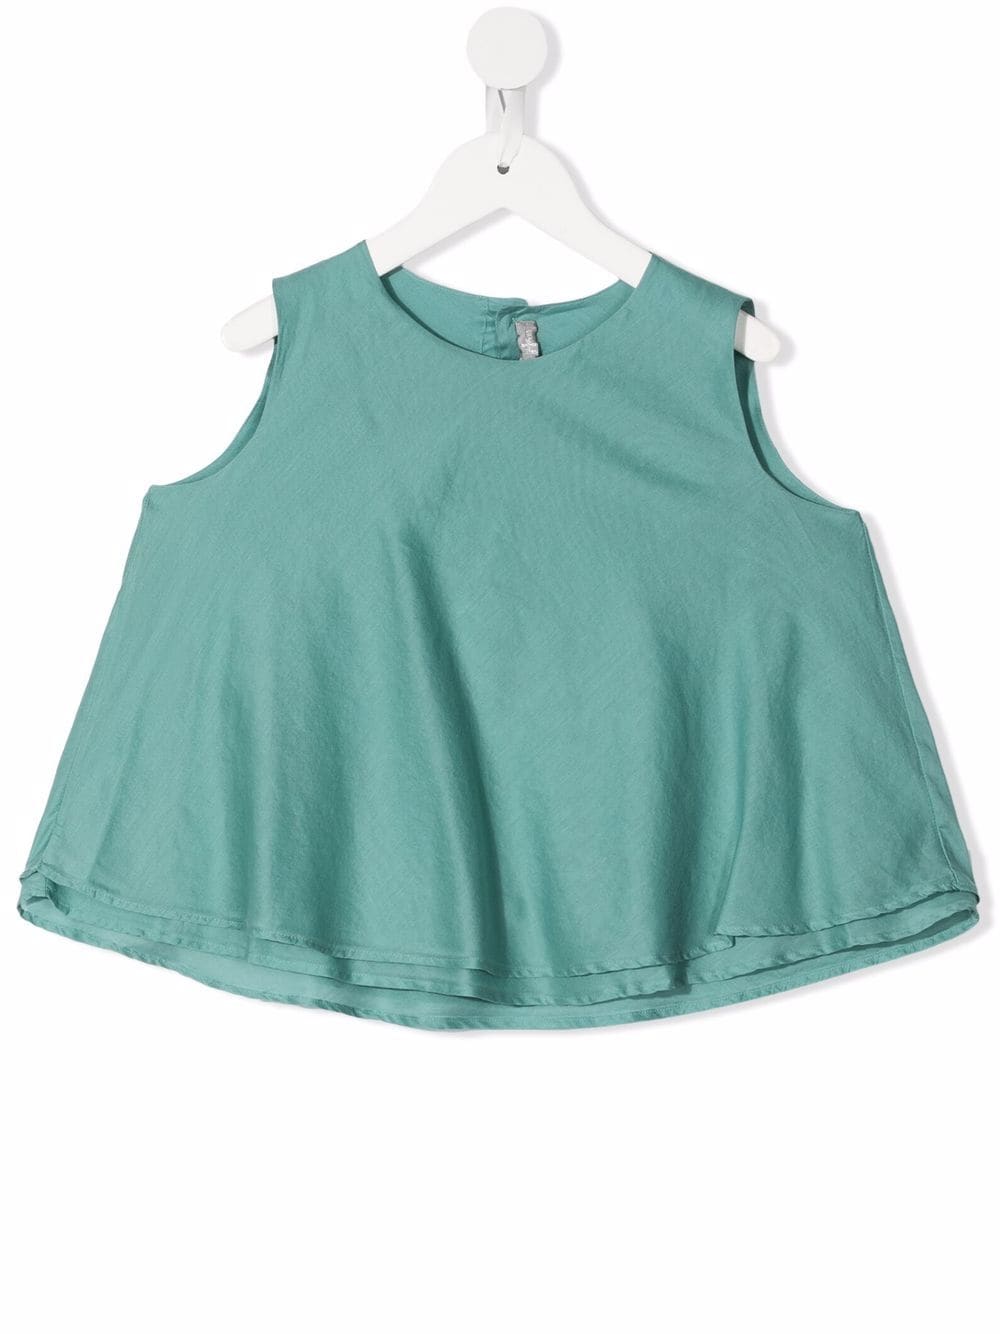 Il Gufo Kids Sleeveless Top In Teal Green Voile